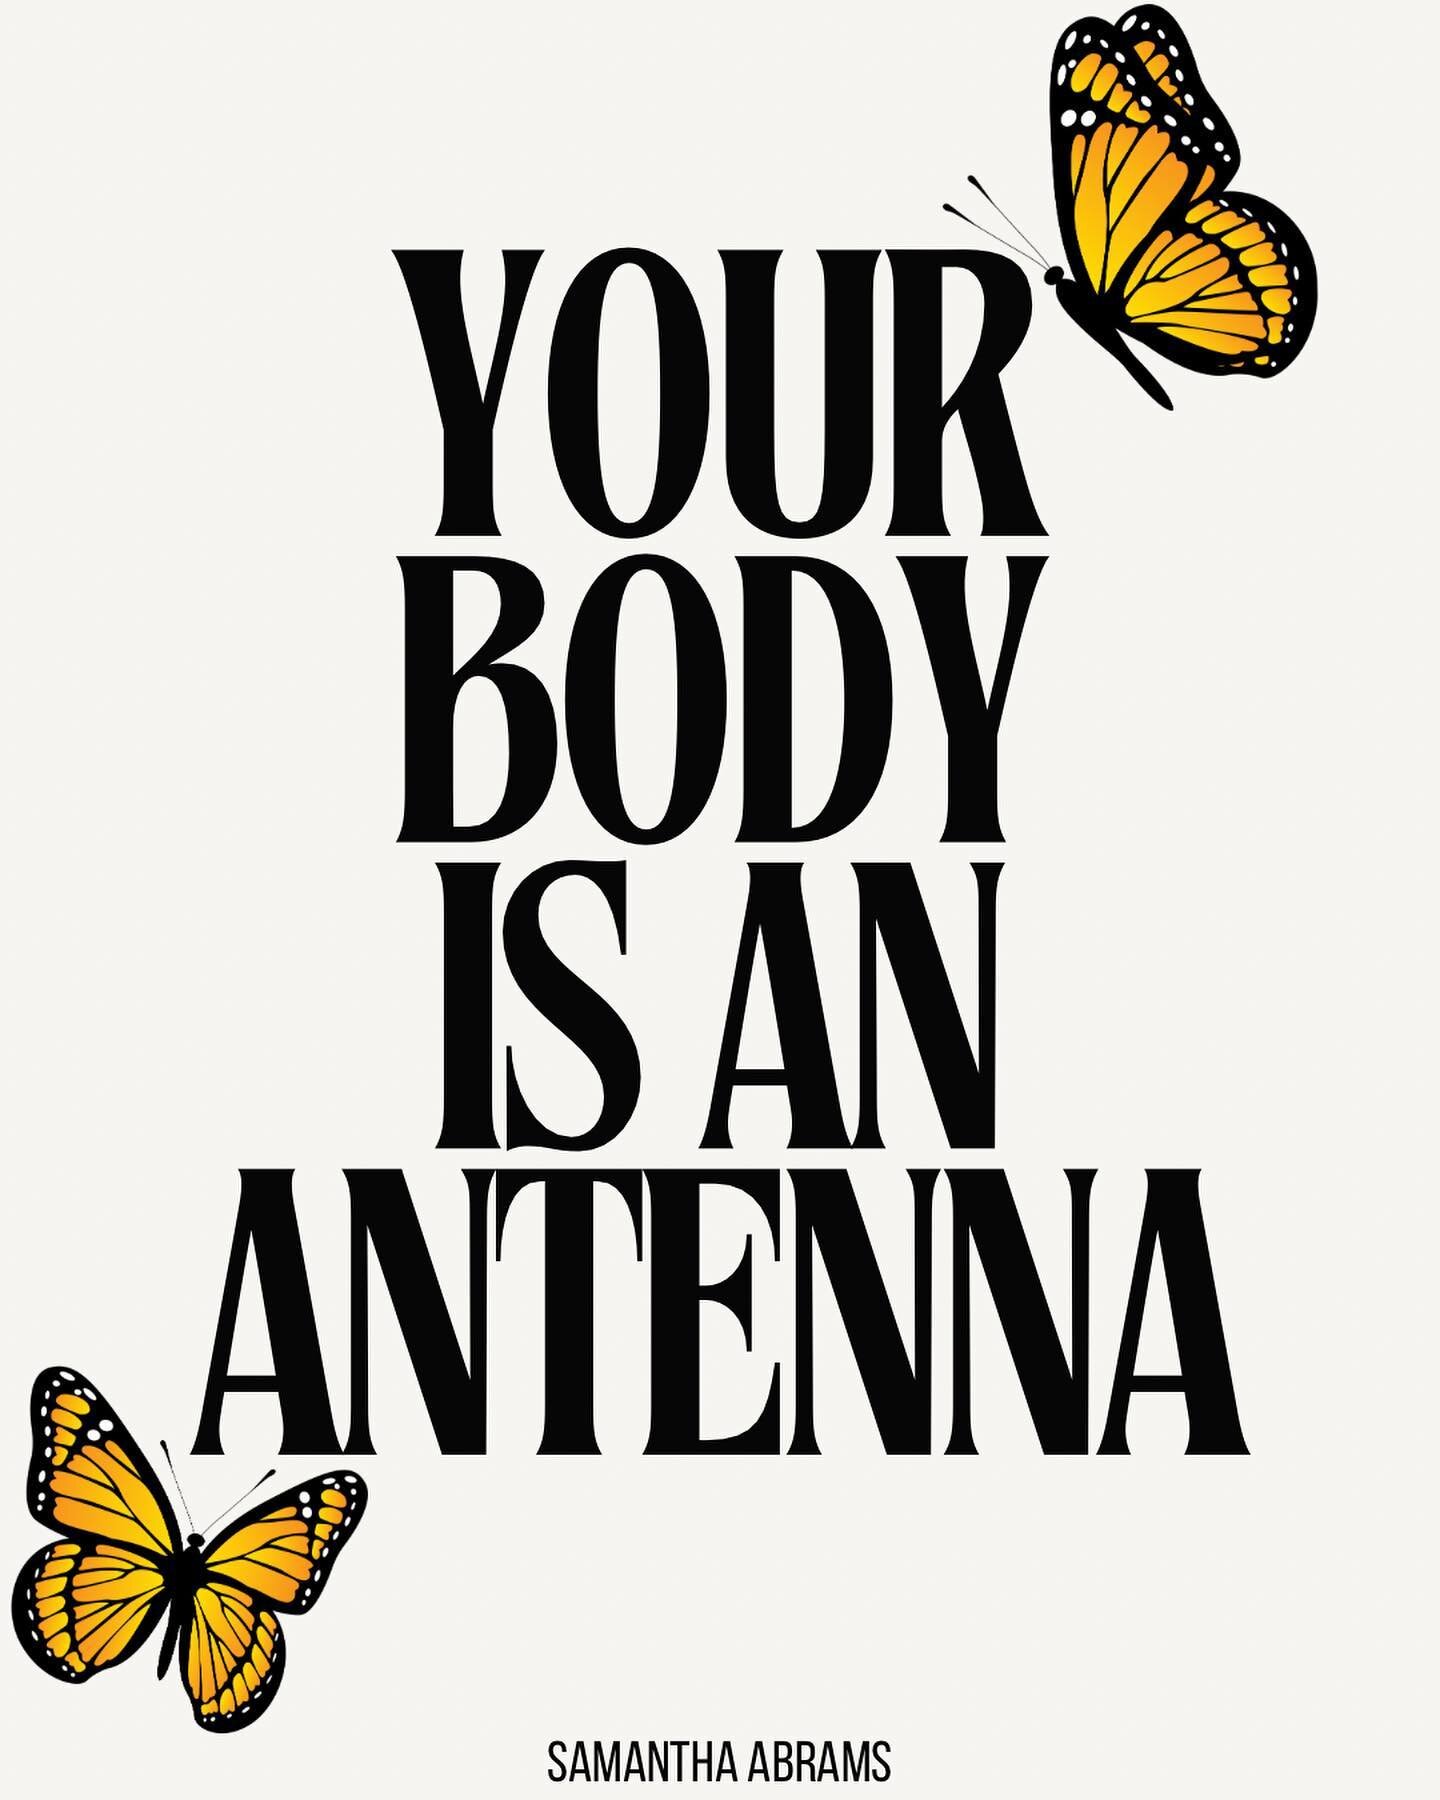 Your body is an antenna 🦋

It&rsquo;s always giving you signals, we just aren&rsquo;t taught how to listen. I&rsquo;m working on something that will help and I can&rsquo;t wait to share. 

Do you struggle to listen to your body/intuition? Feel free 